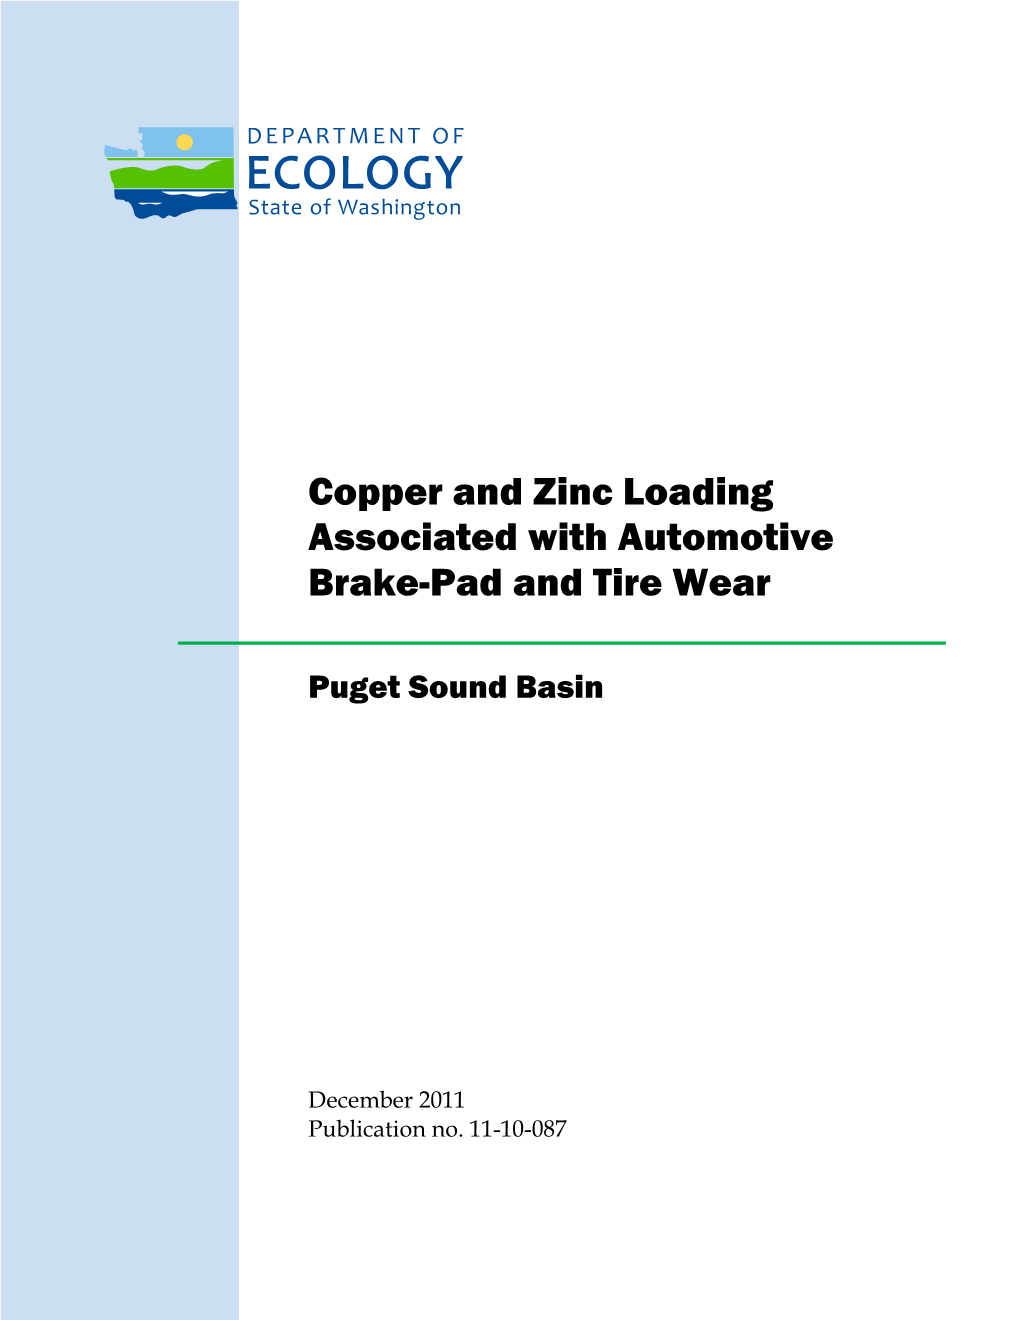 Copper and Zinc Loading Associated with Automotive Brake-Pad and Tire Wear